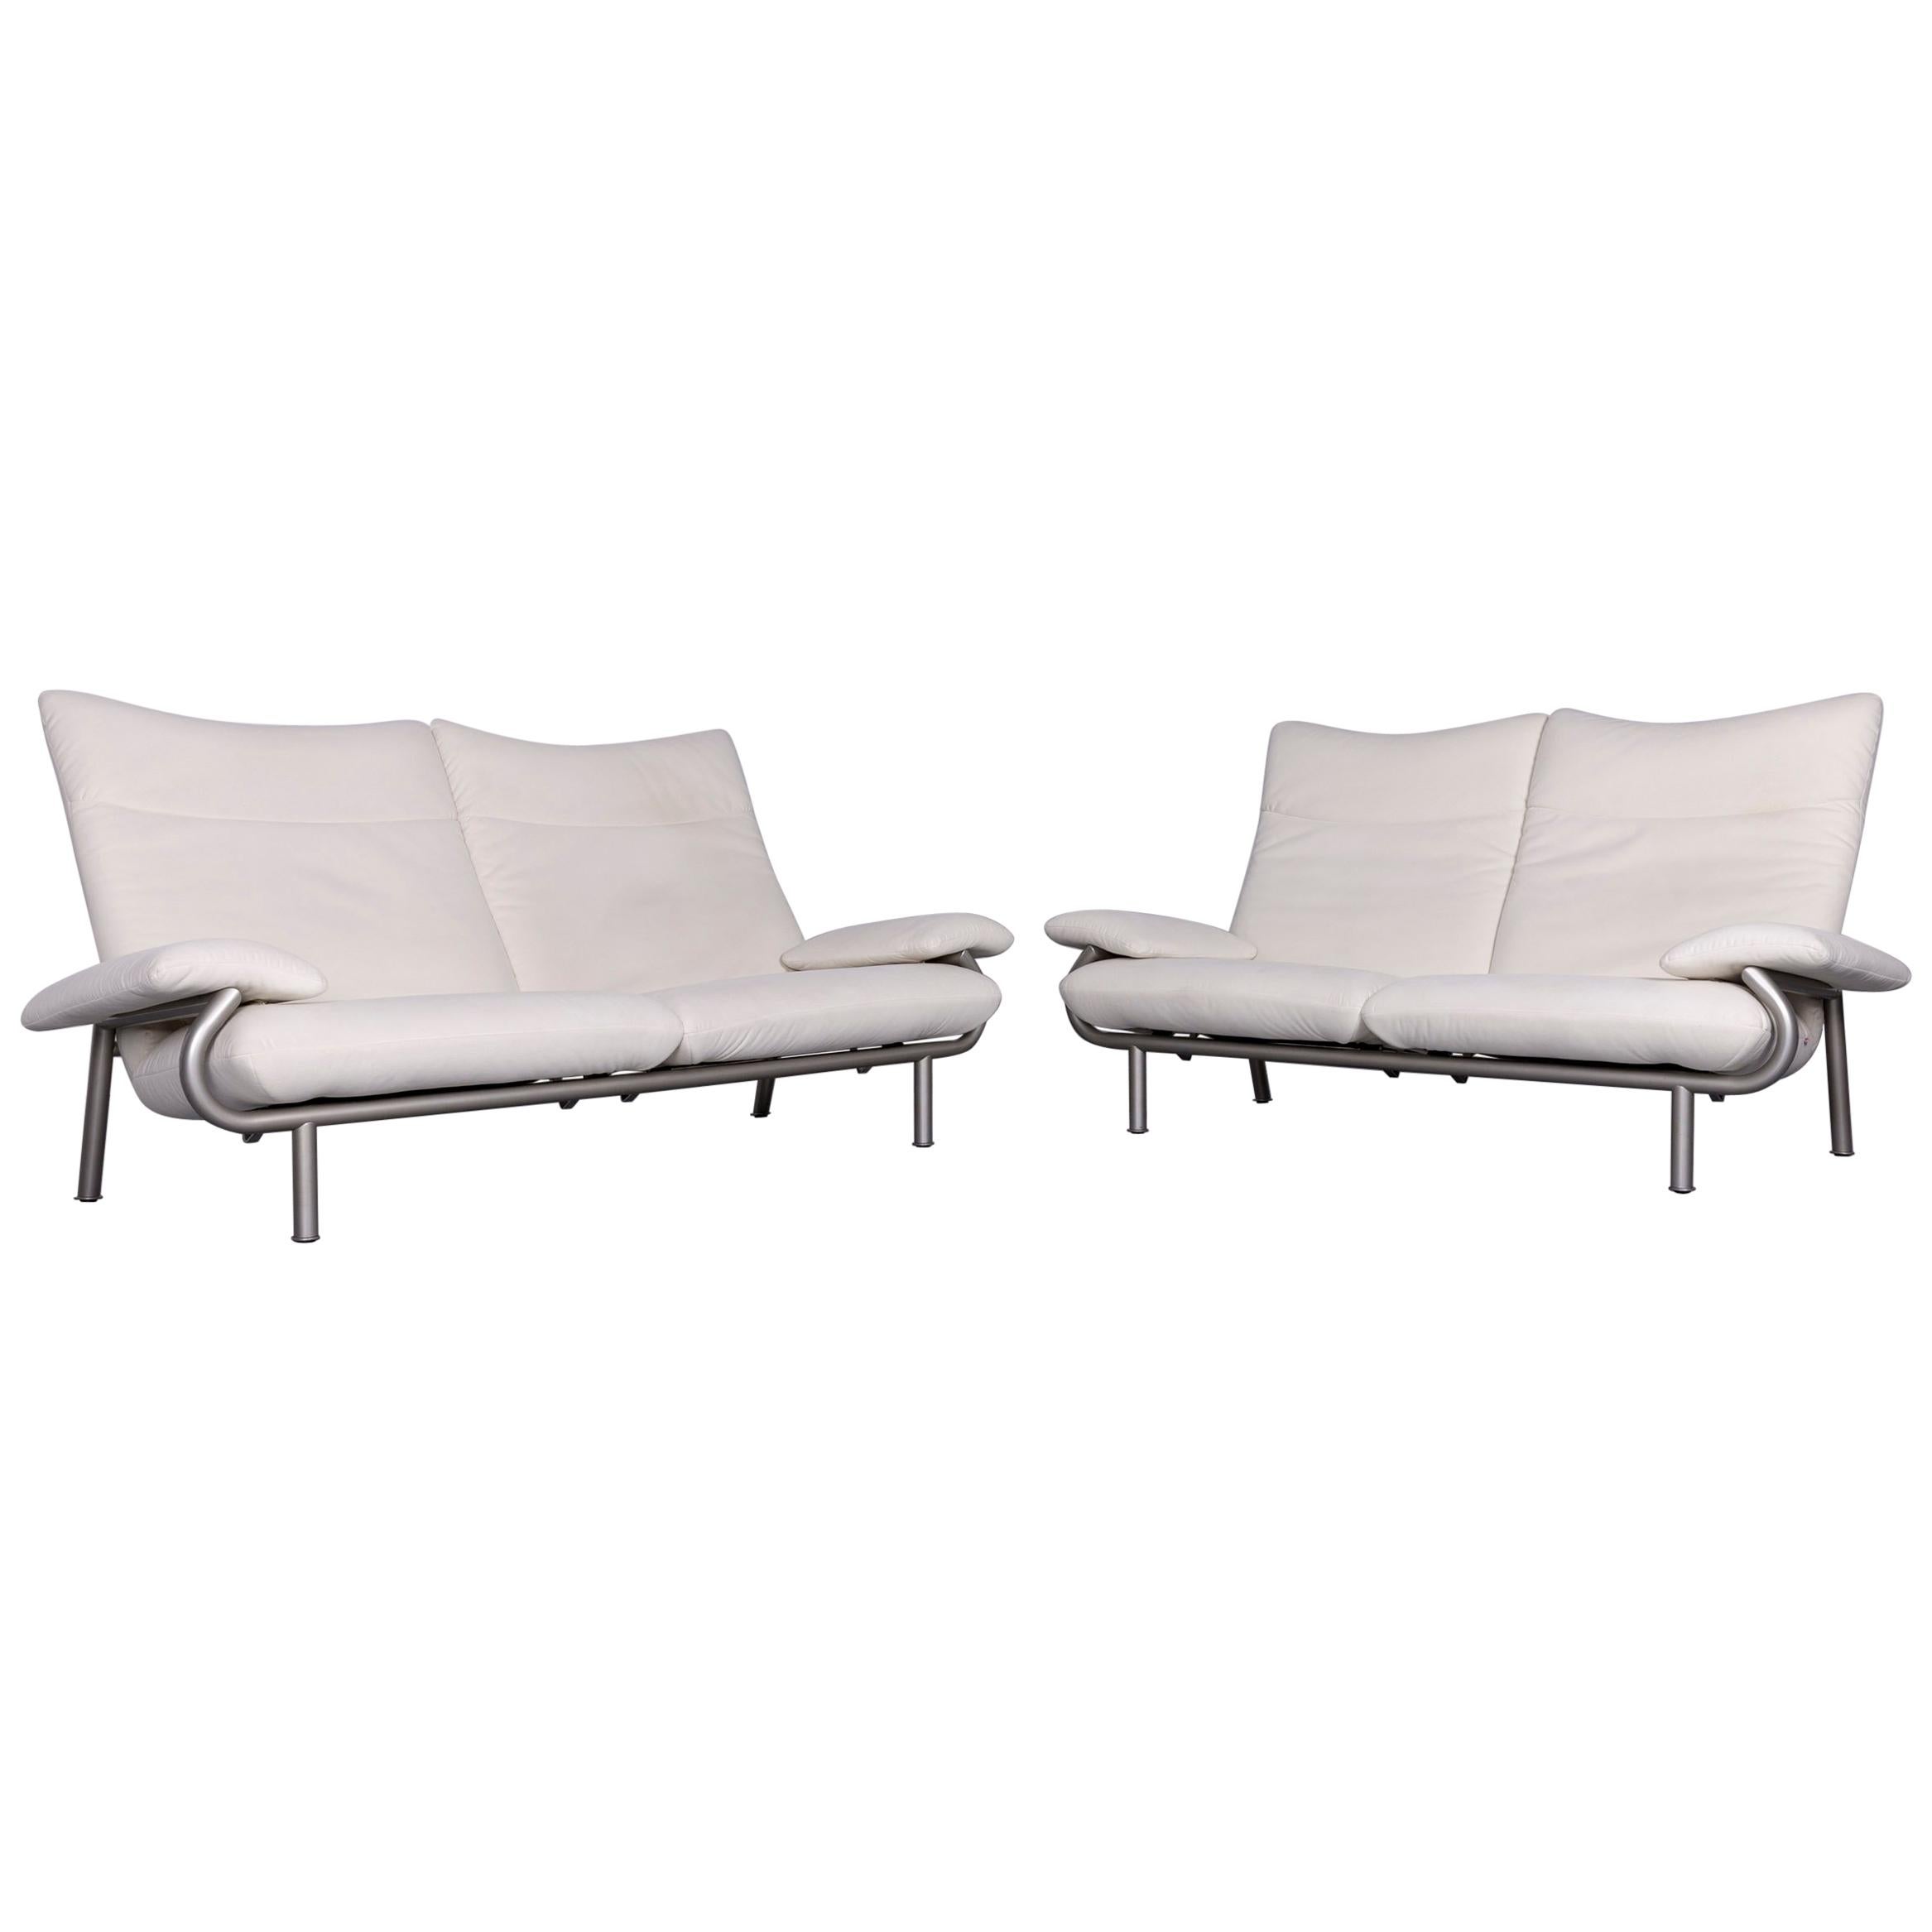 Laauser Designer Fabric Sofa Set White Three-Seat Two-Seat Couch For Sale